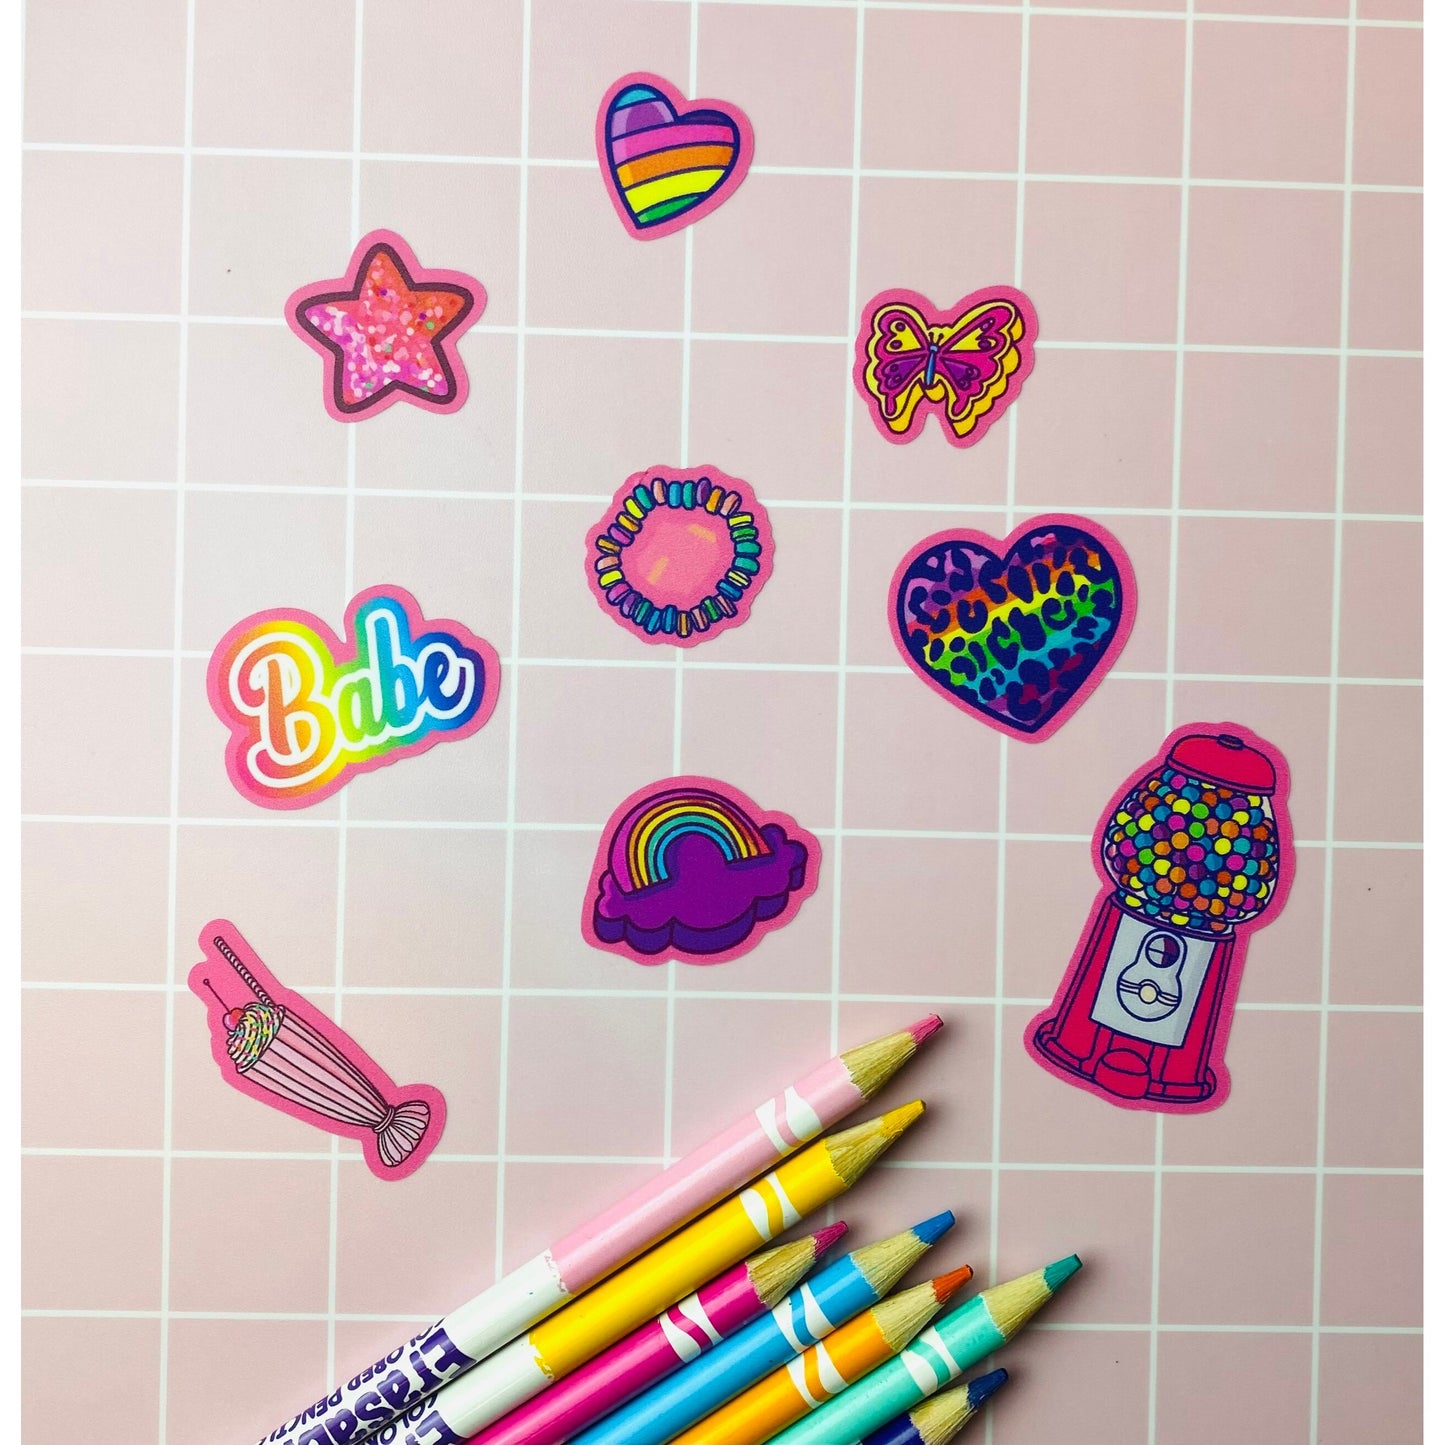 90's Girly Stickers - 47 Printable Stickers Mega (2268239)